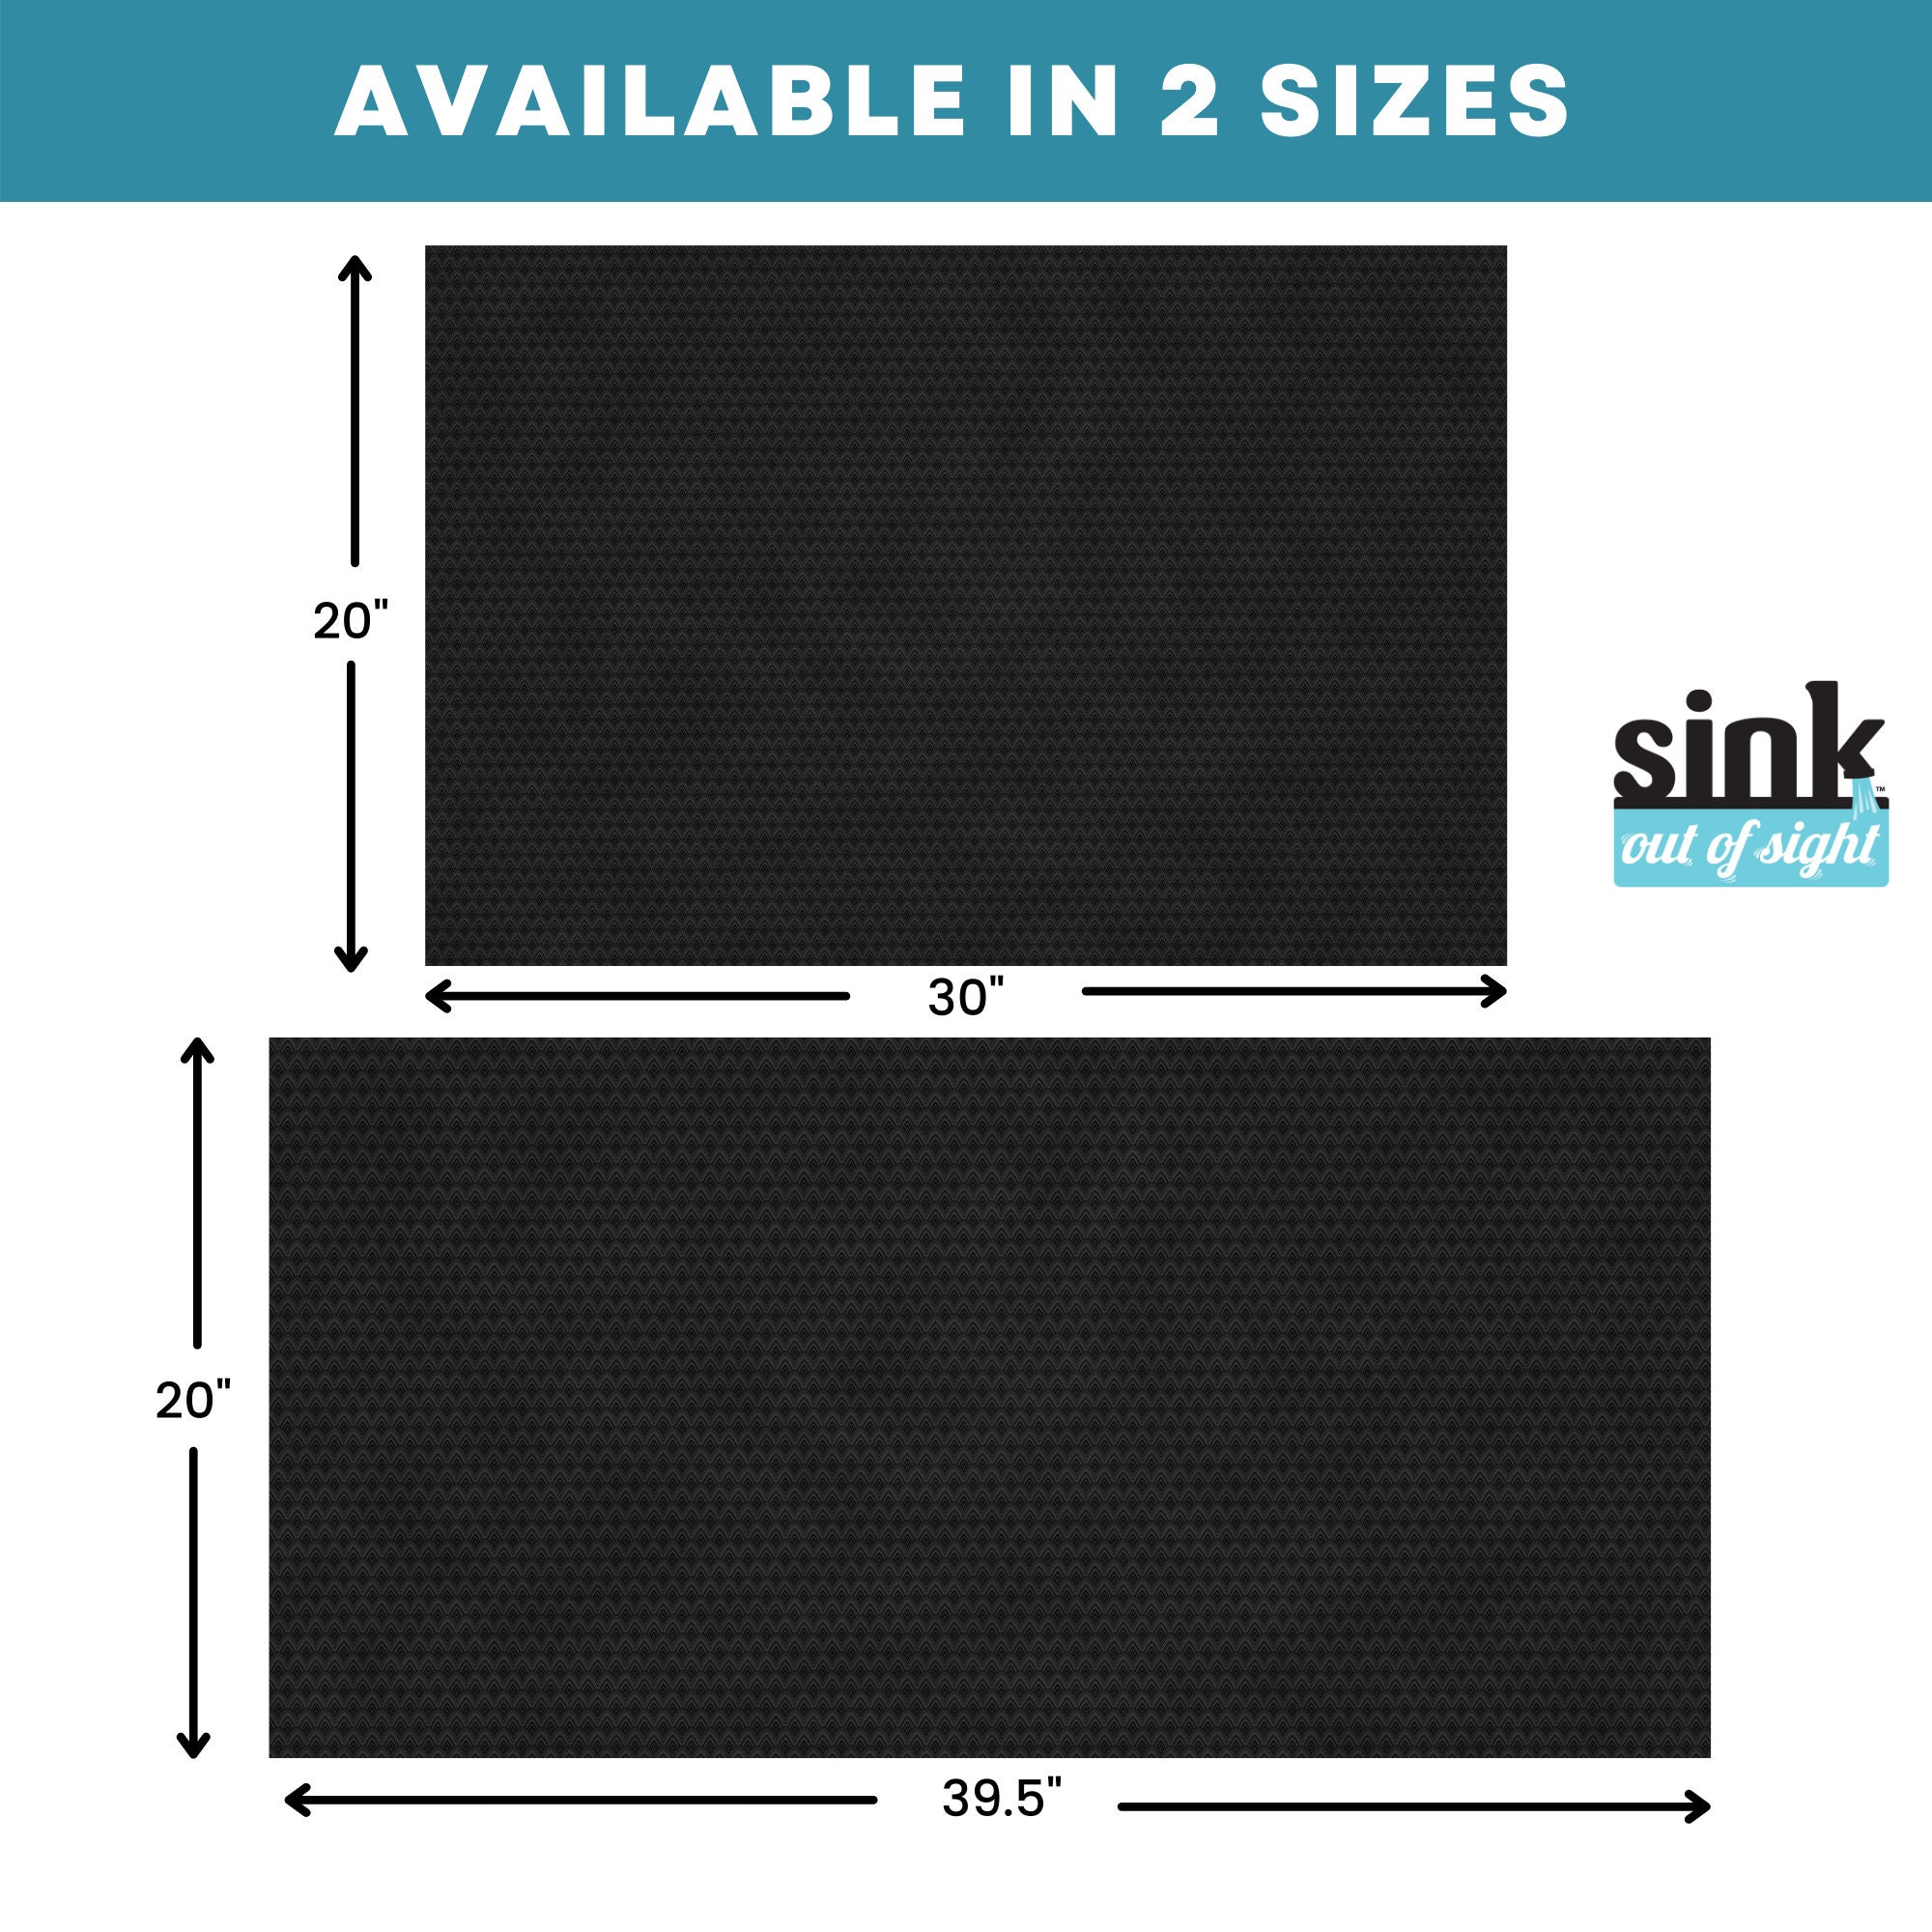 Sink Out of Sight- Home Dcor Kitchen Sink Cover, Hot/Cold Liquids